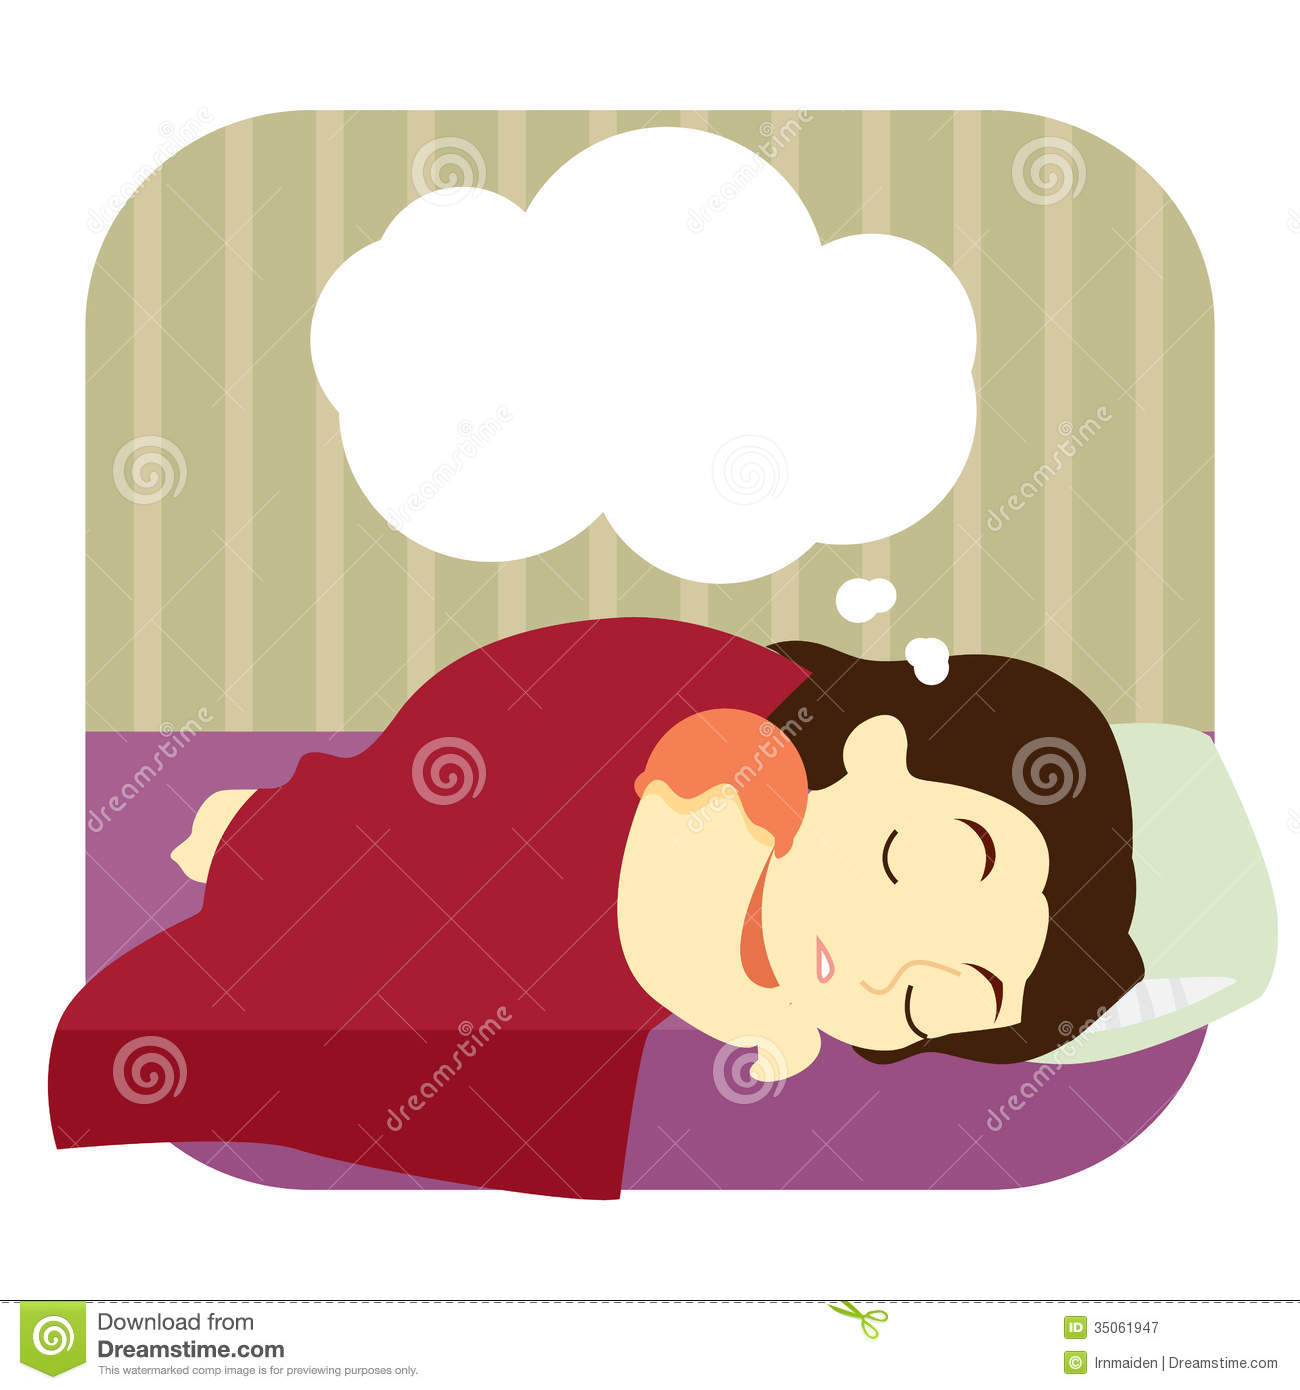 Young Woman Dreaming In Her Sleep Royalty Free Stock Photography